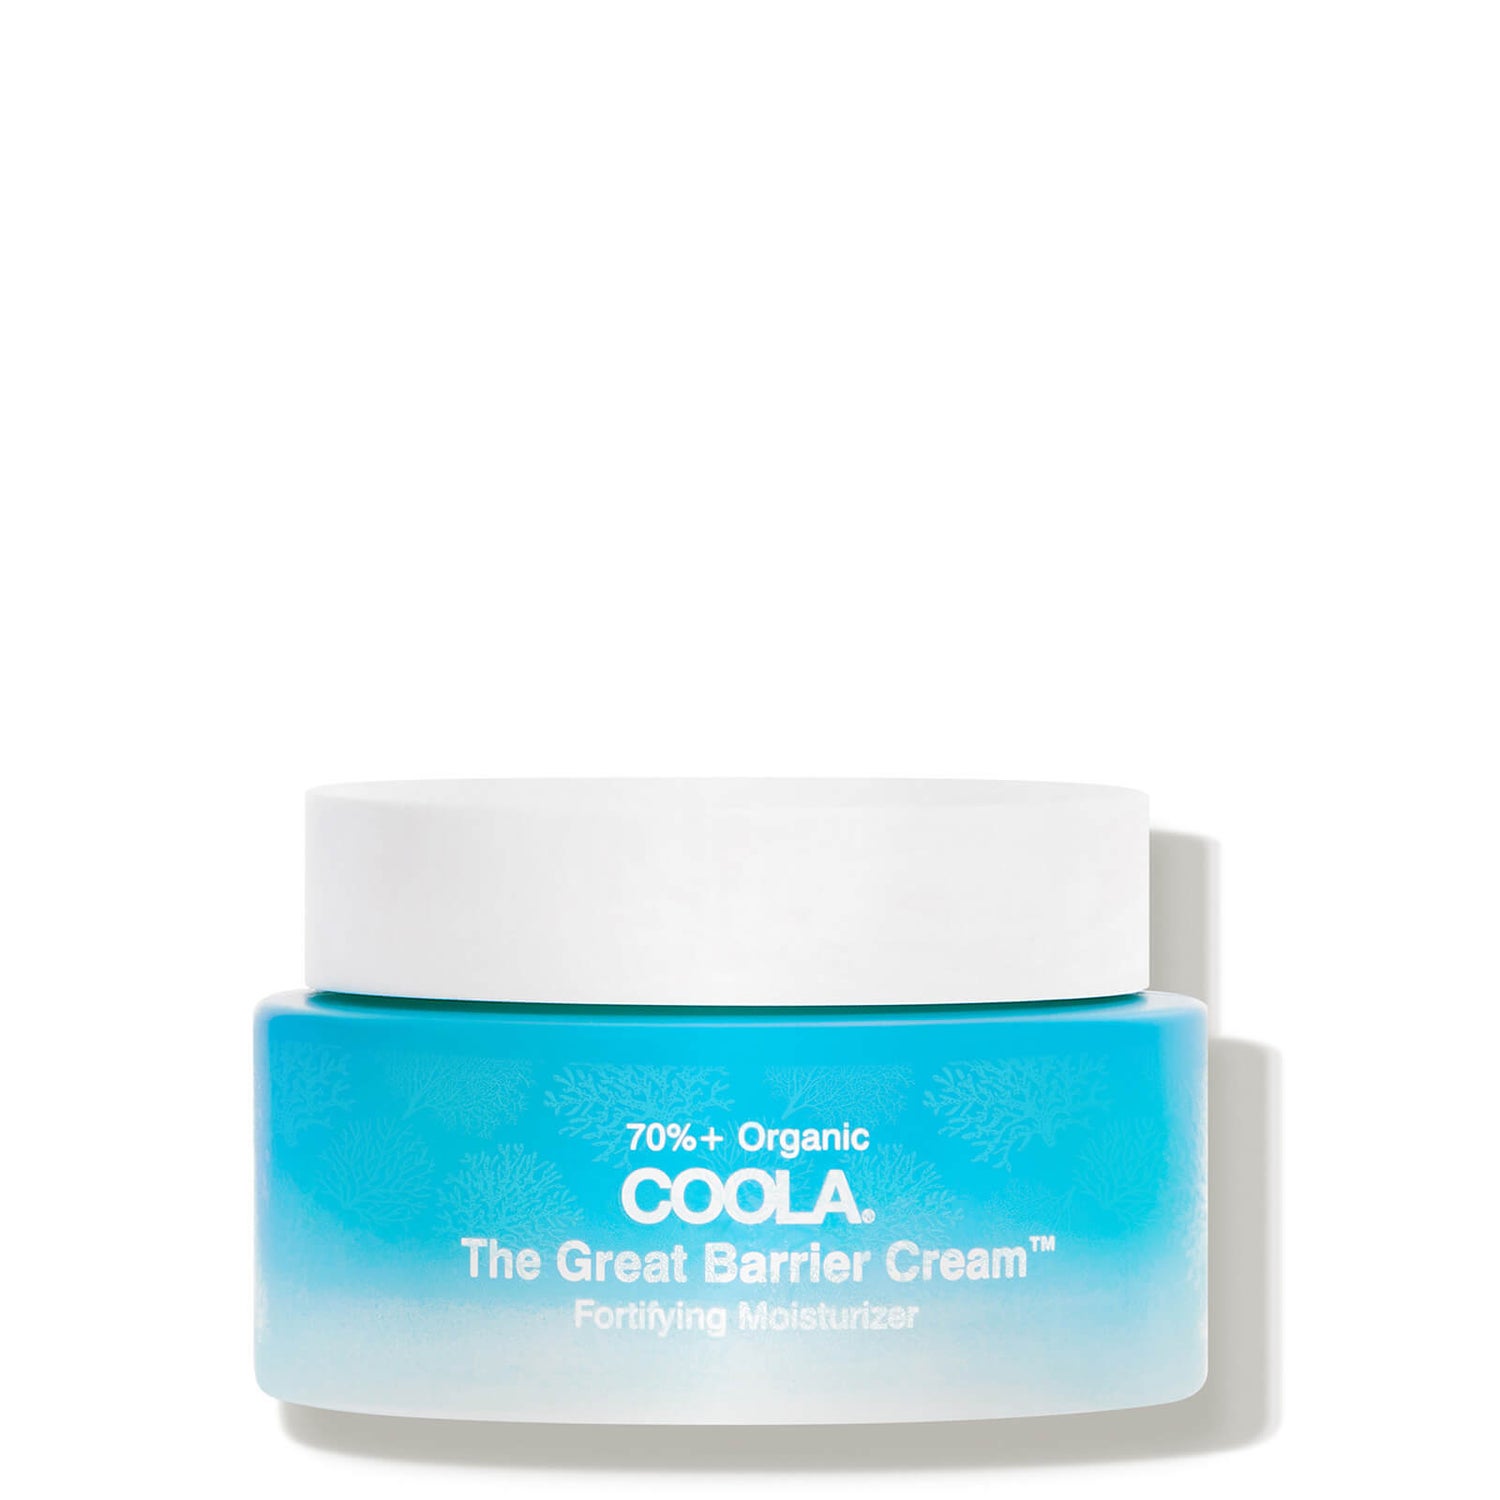 COOLA The Great Barrier Cream Fortifying Moisturizer 1.5 oz.